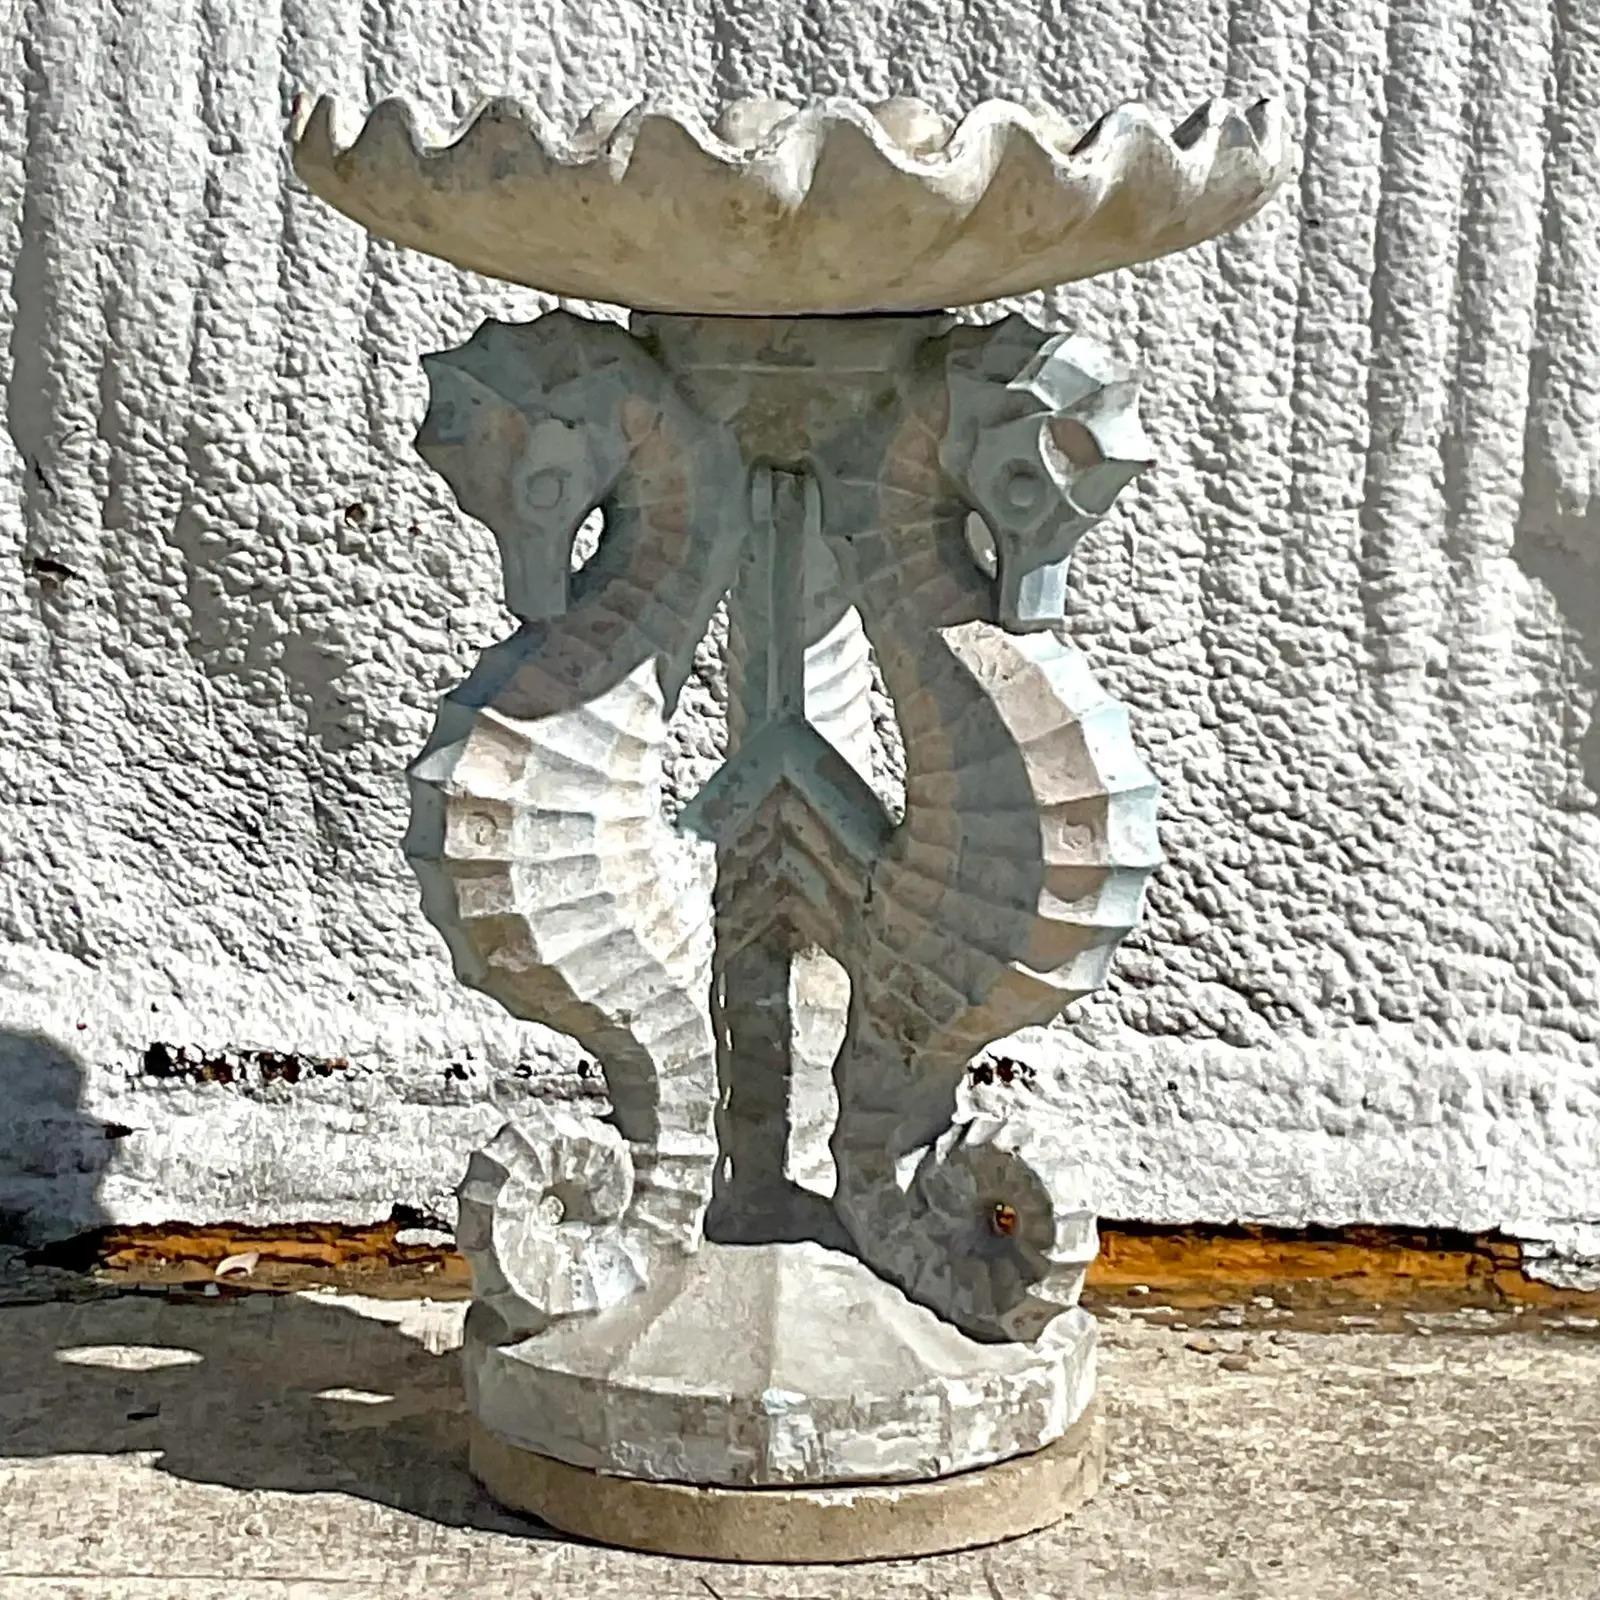 A spectacular vintage Coastal cement birdbath. The coveted trio of seahorses with the remains of an older pale blue paint. The overall effect is so good. Acquired from a Palm Beach estate.

The birdbath is in great vintage condition. Chips and